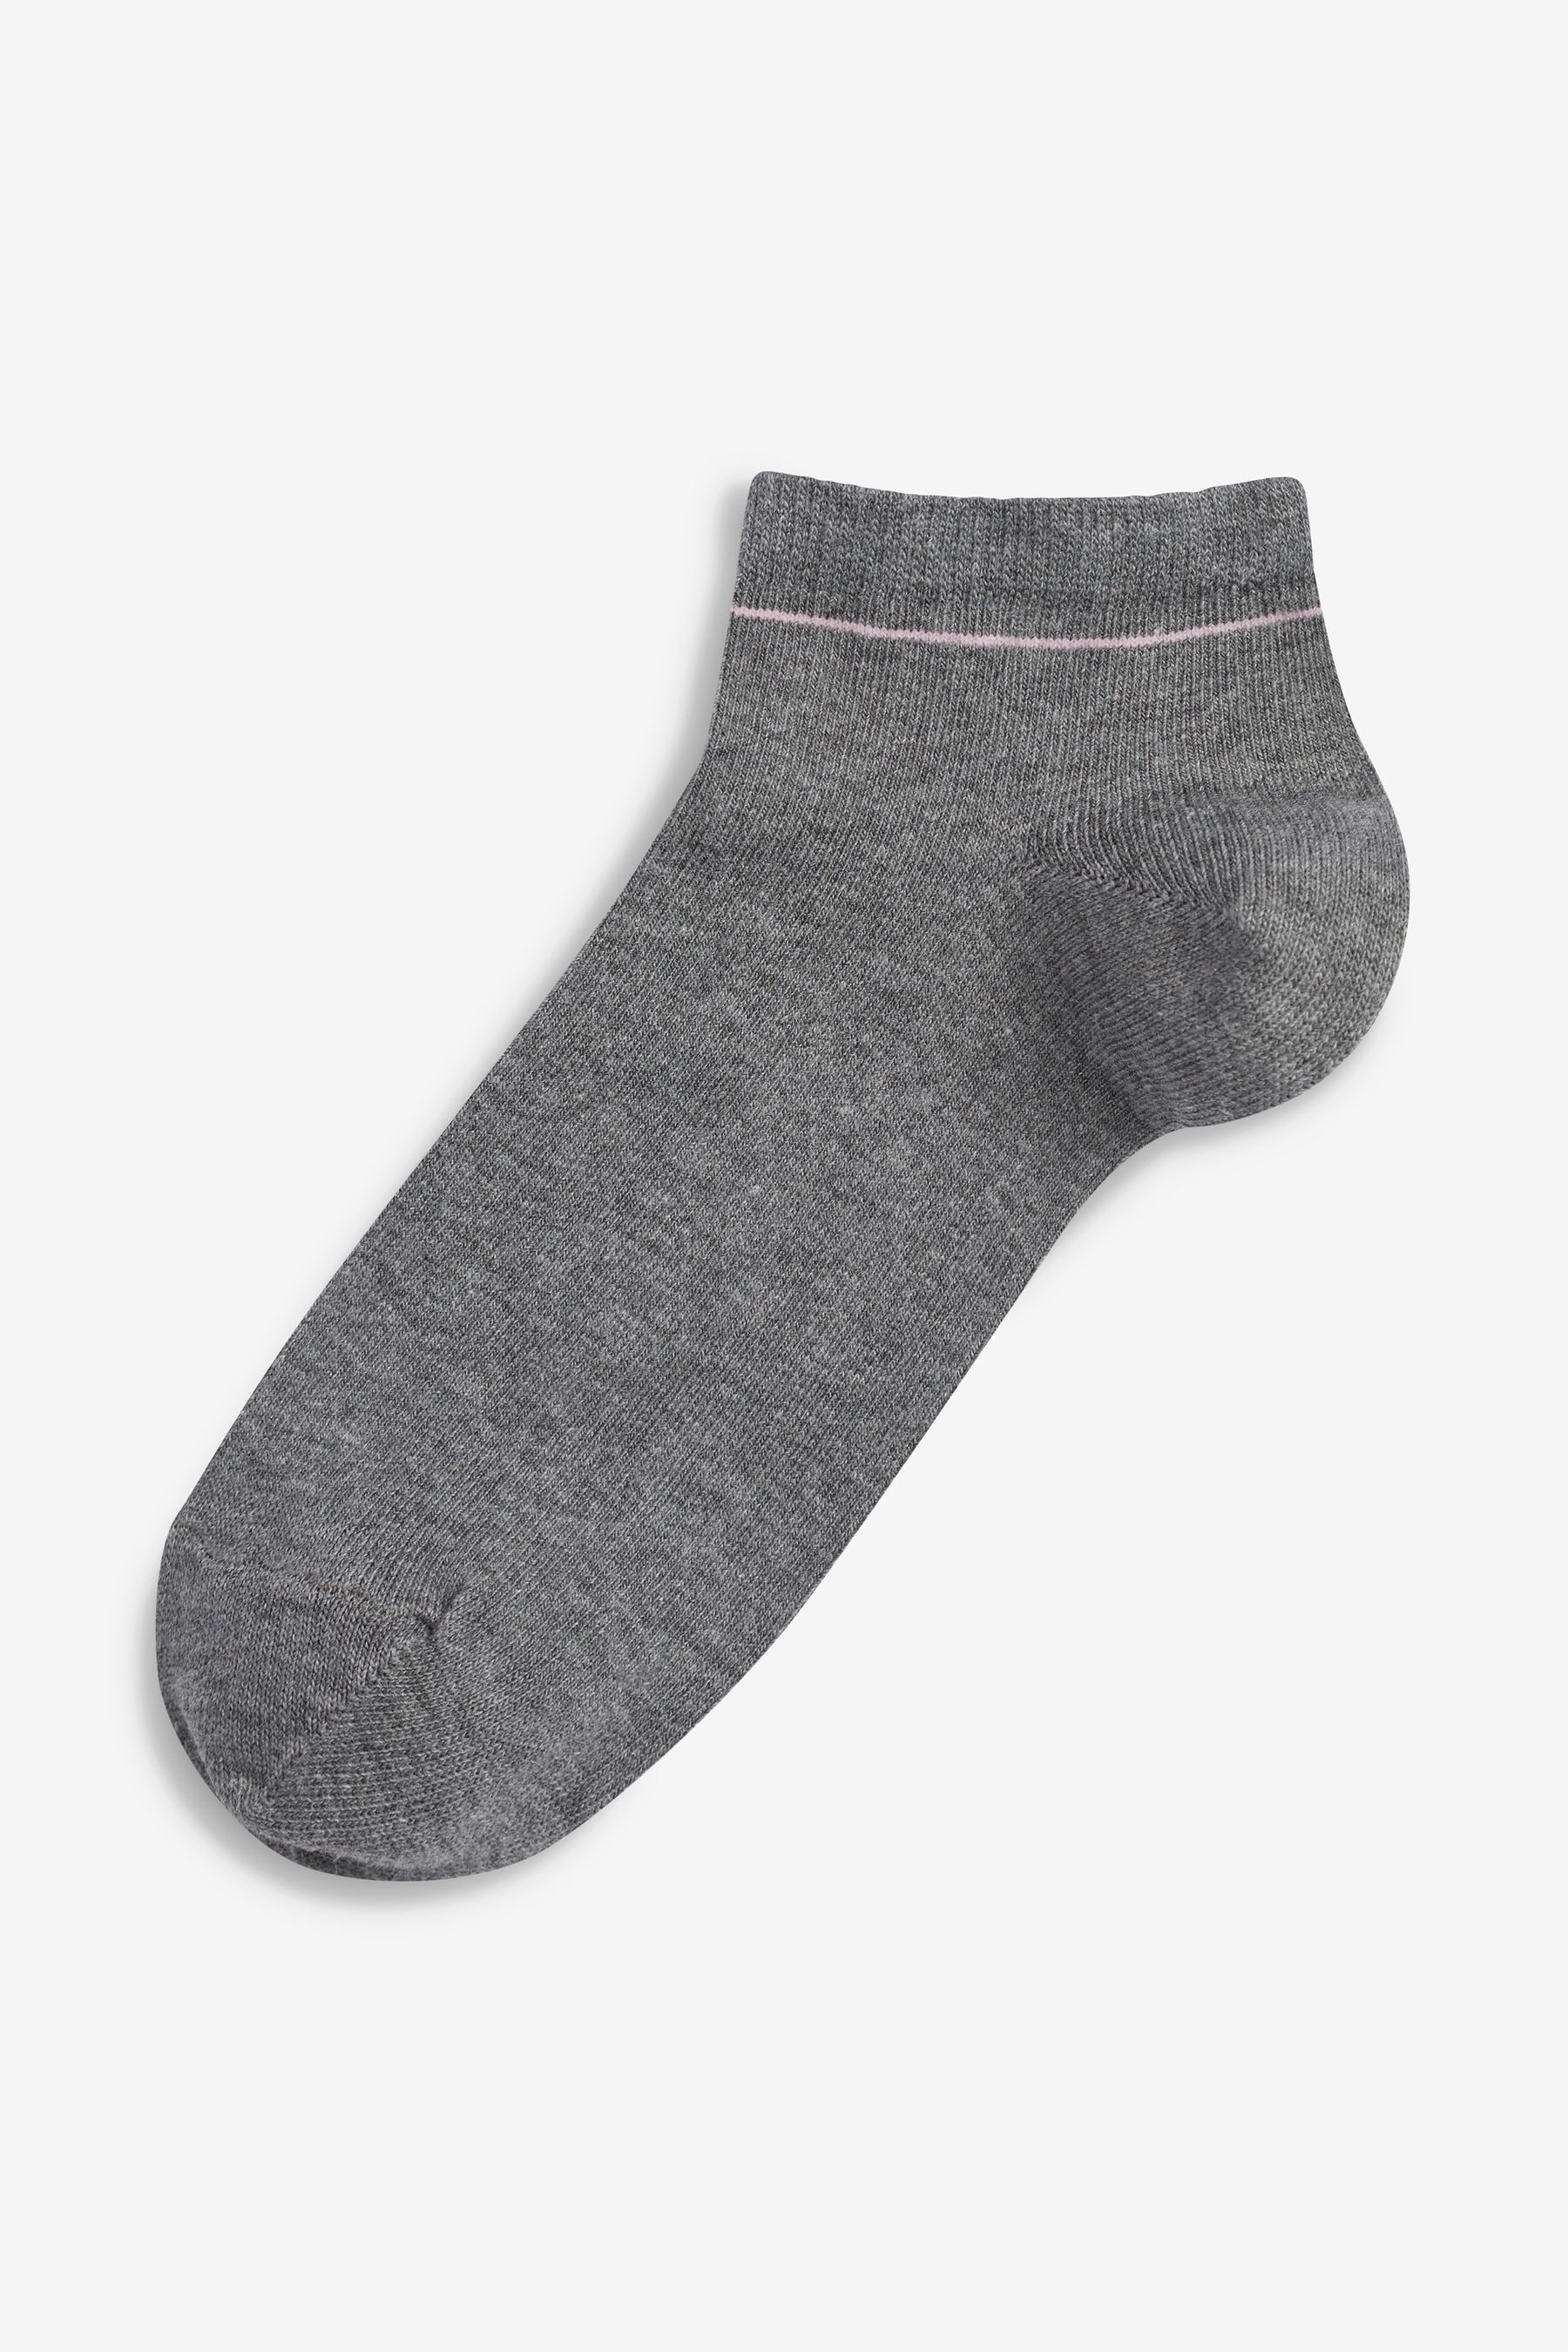 Buy Grey Modal Trainer Socks 4 Pack from the Next UK online shop